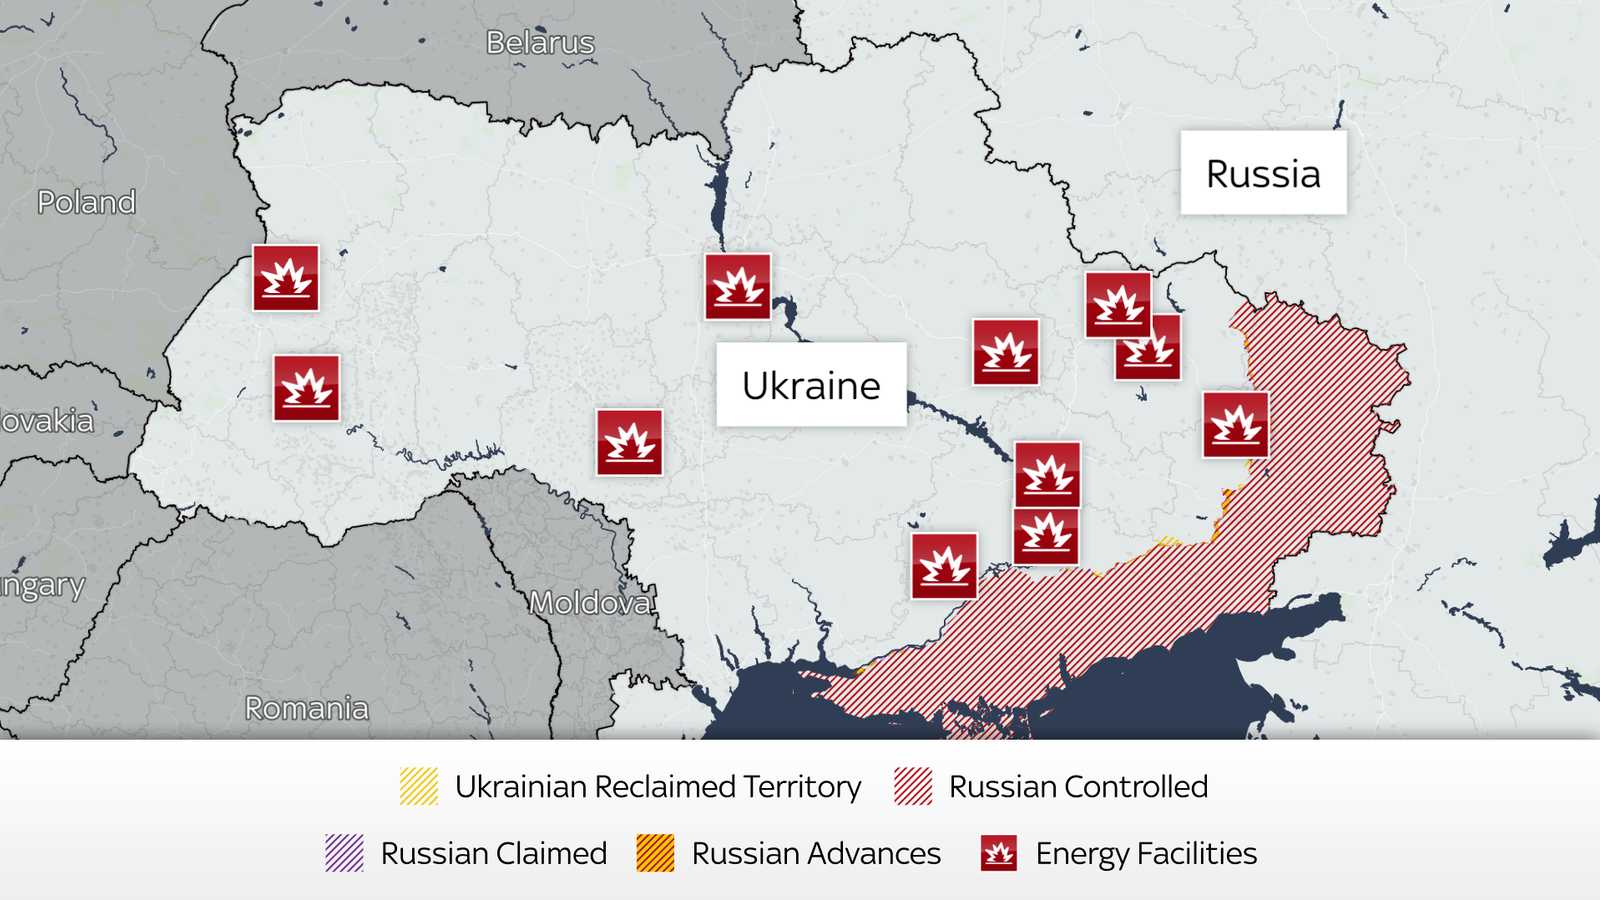 russia steps up attacks on energy facilities with ukraine 'vulnerable' without stronger air defences